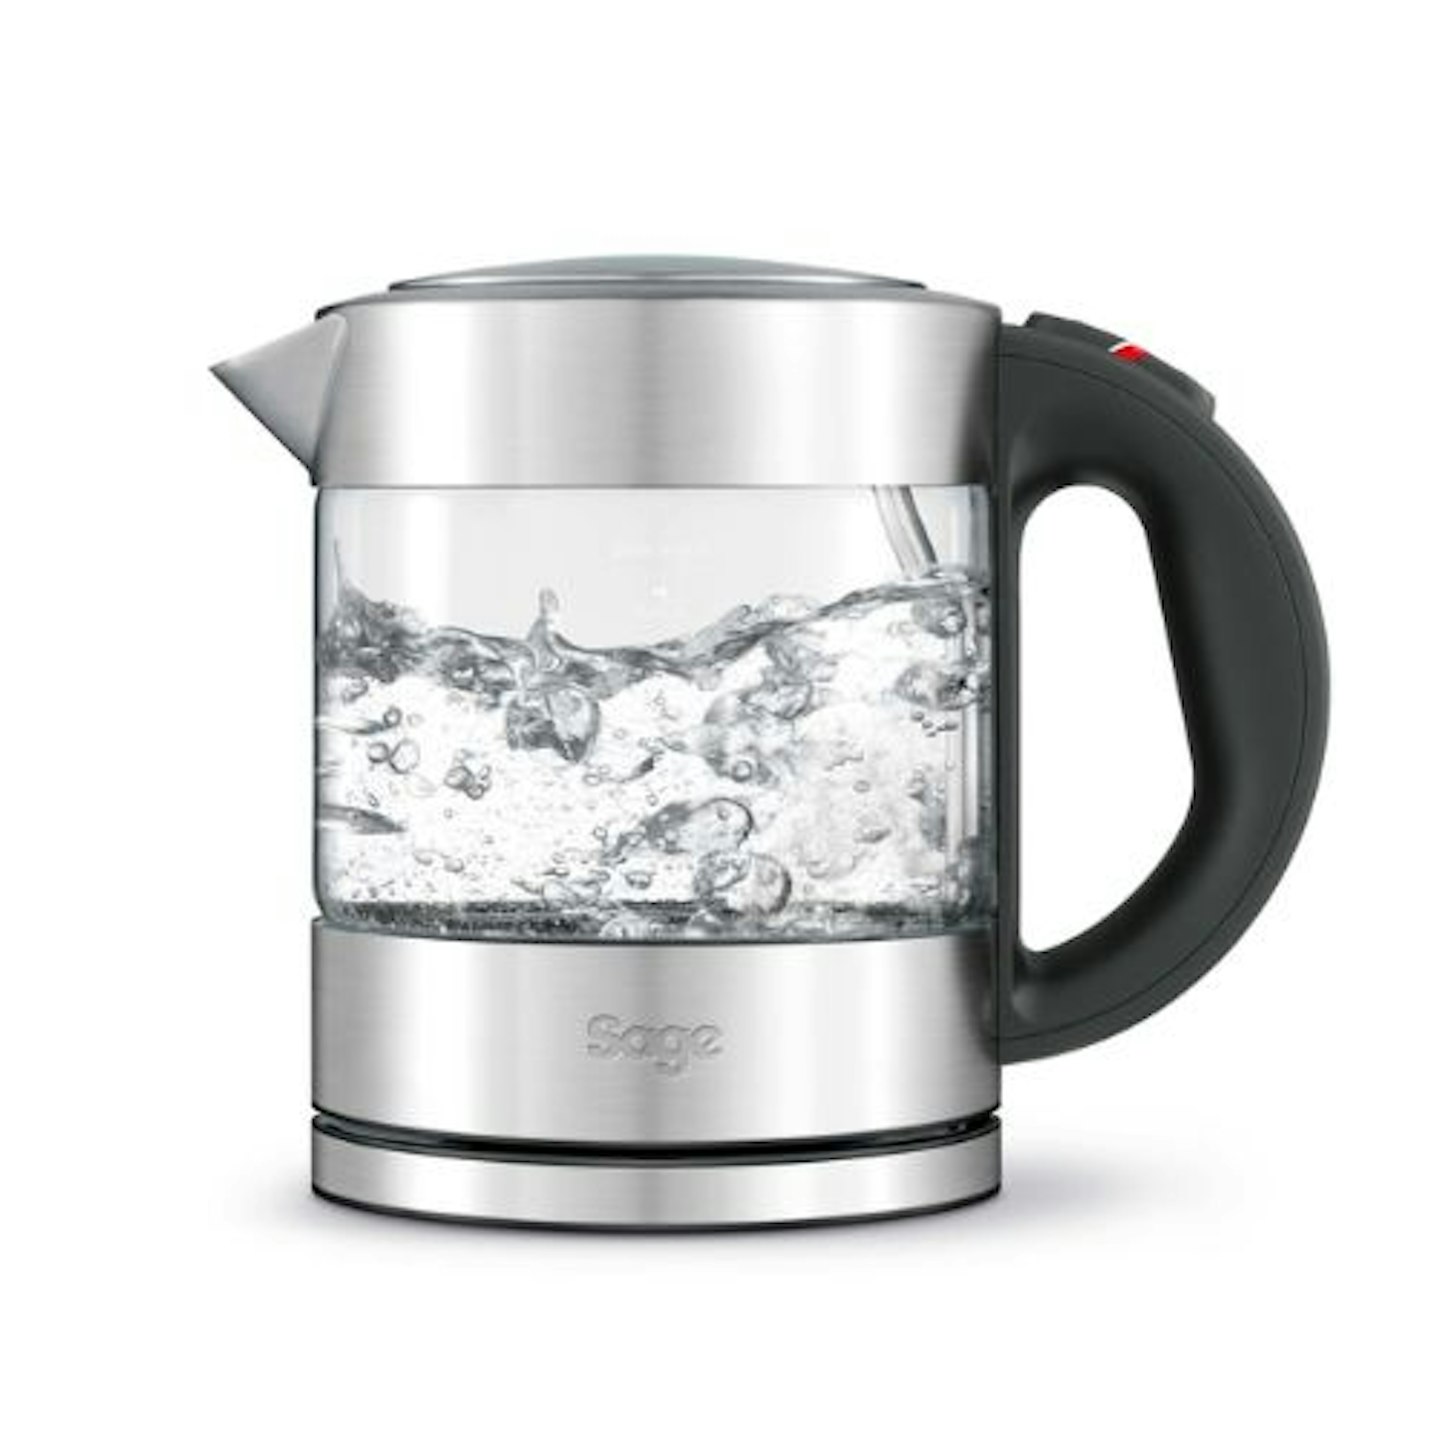 Sage The Compact Glass Kettle